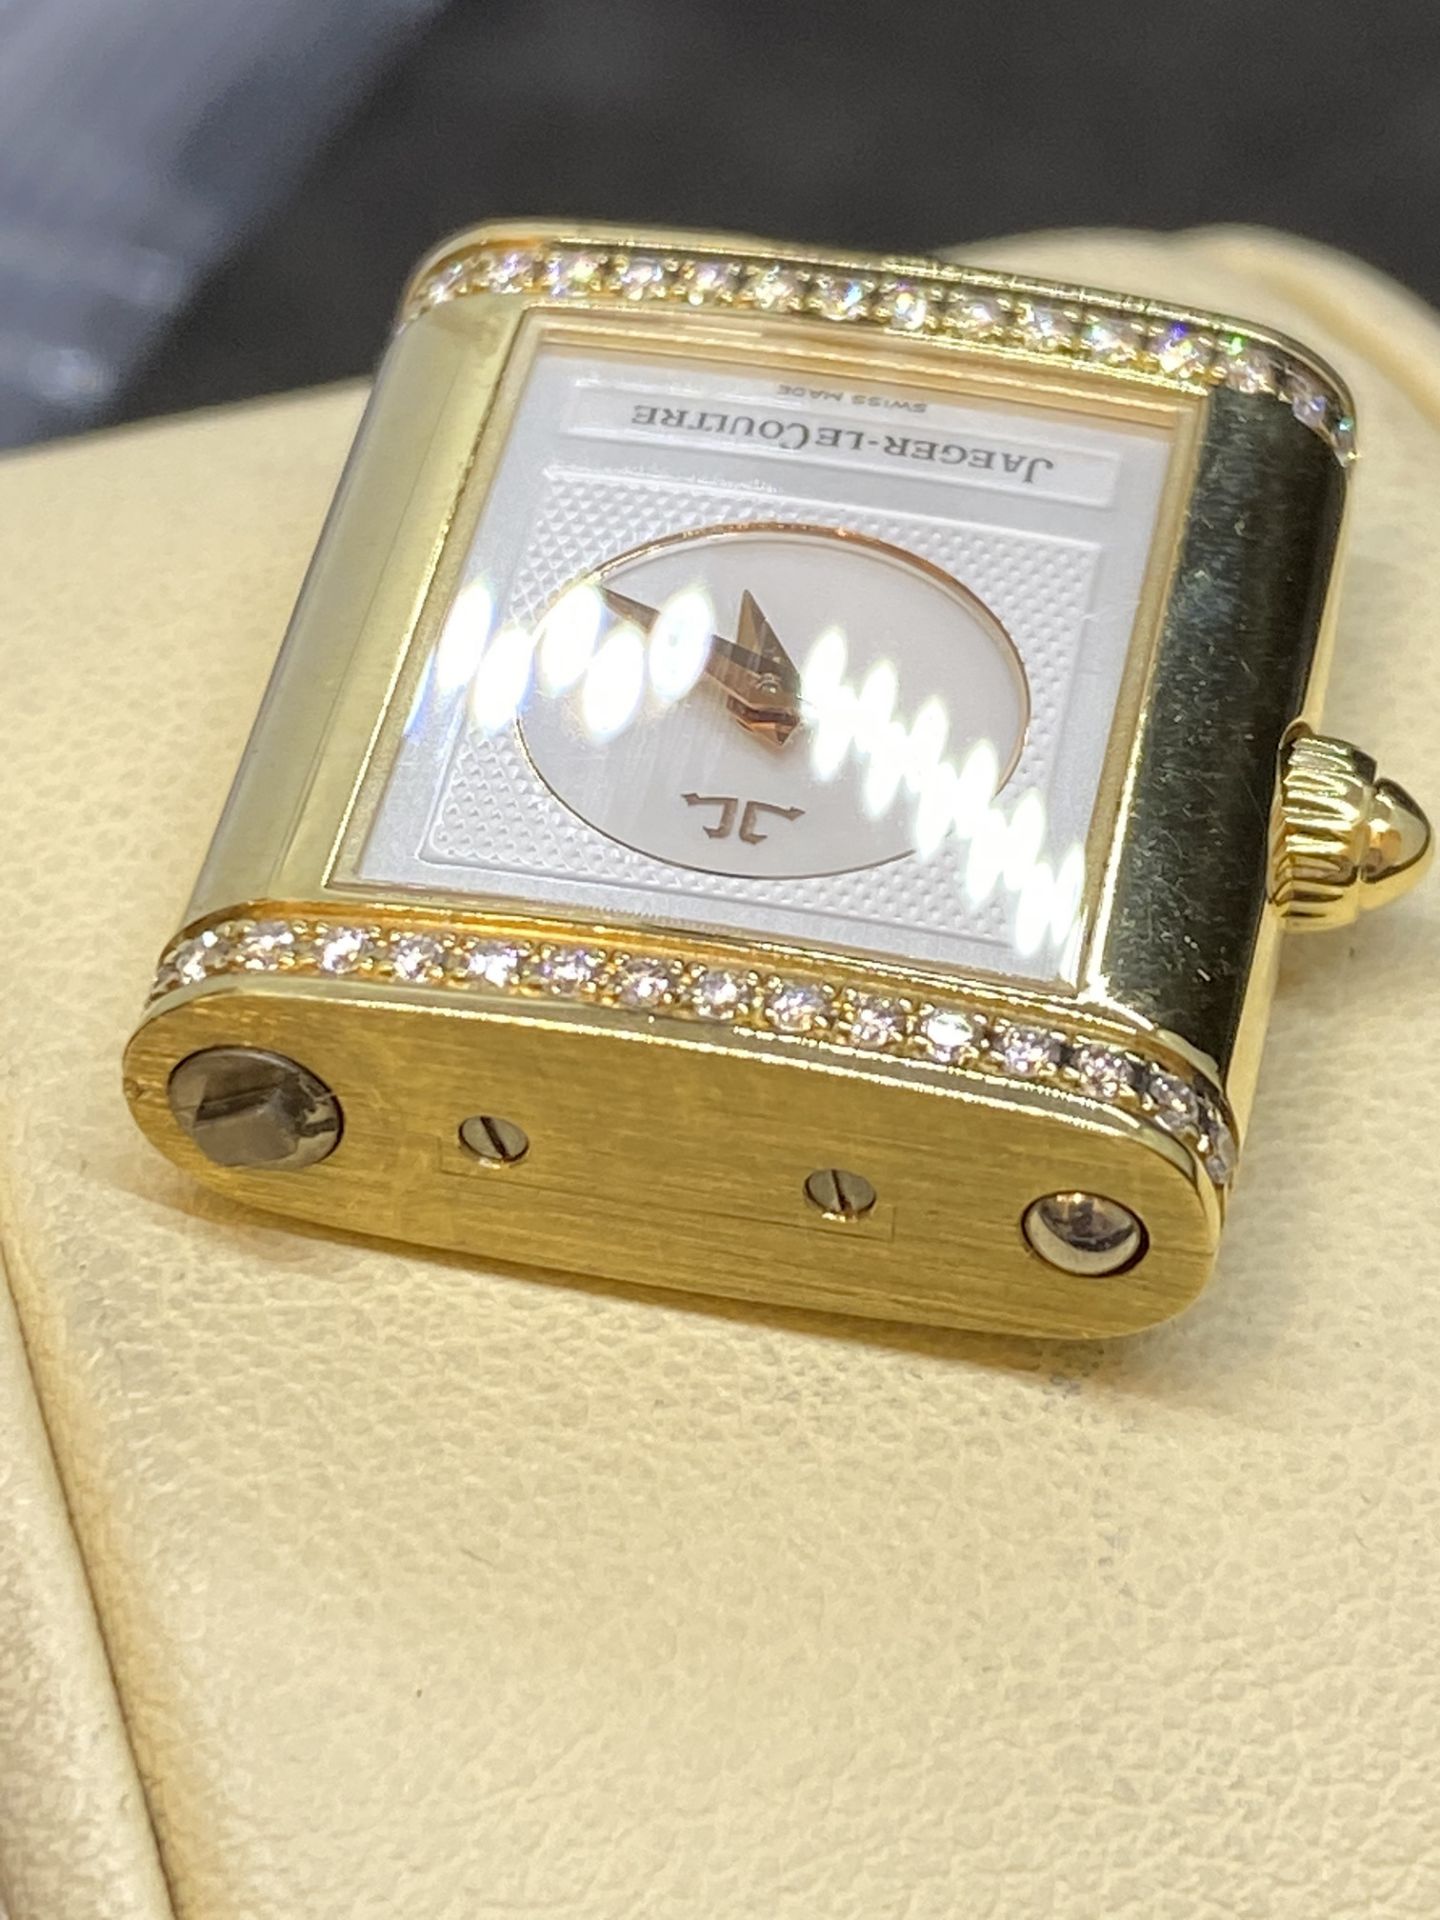 JAEGER LECOULTRE REVERSIBLE 18ct GOLD & DIAMOND WATCH BODY - Image 4 of 9